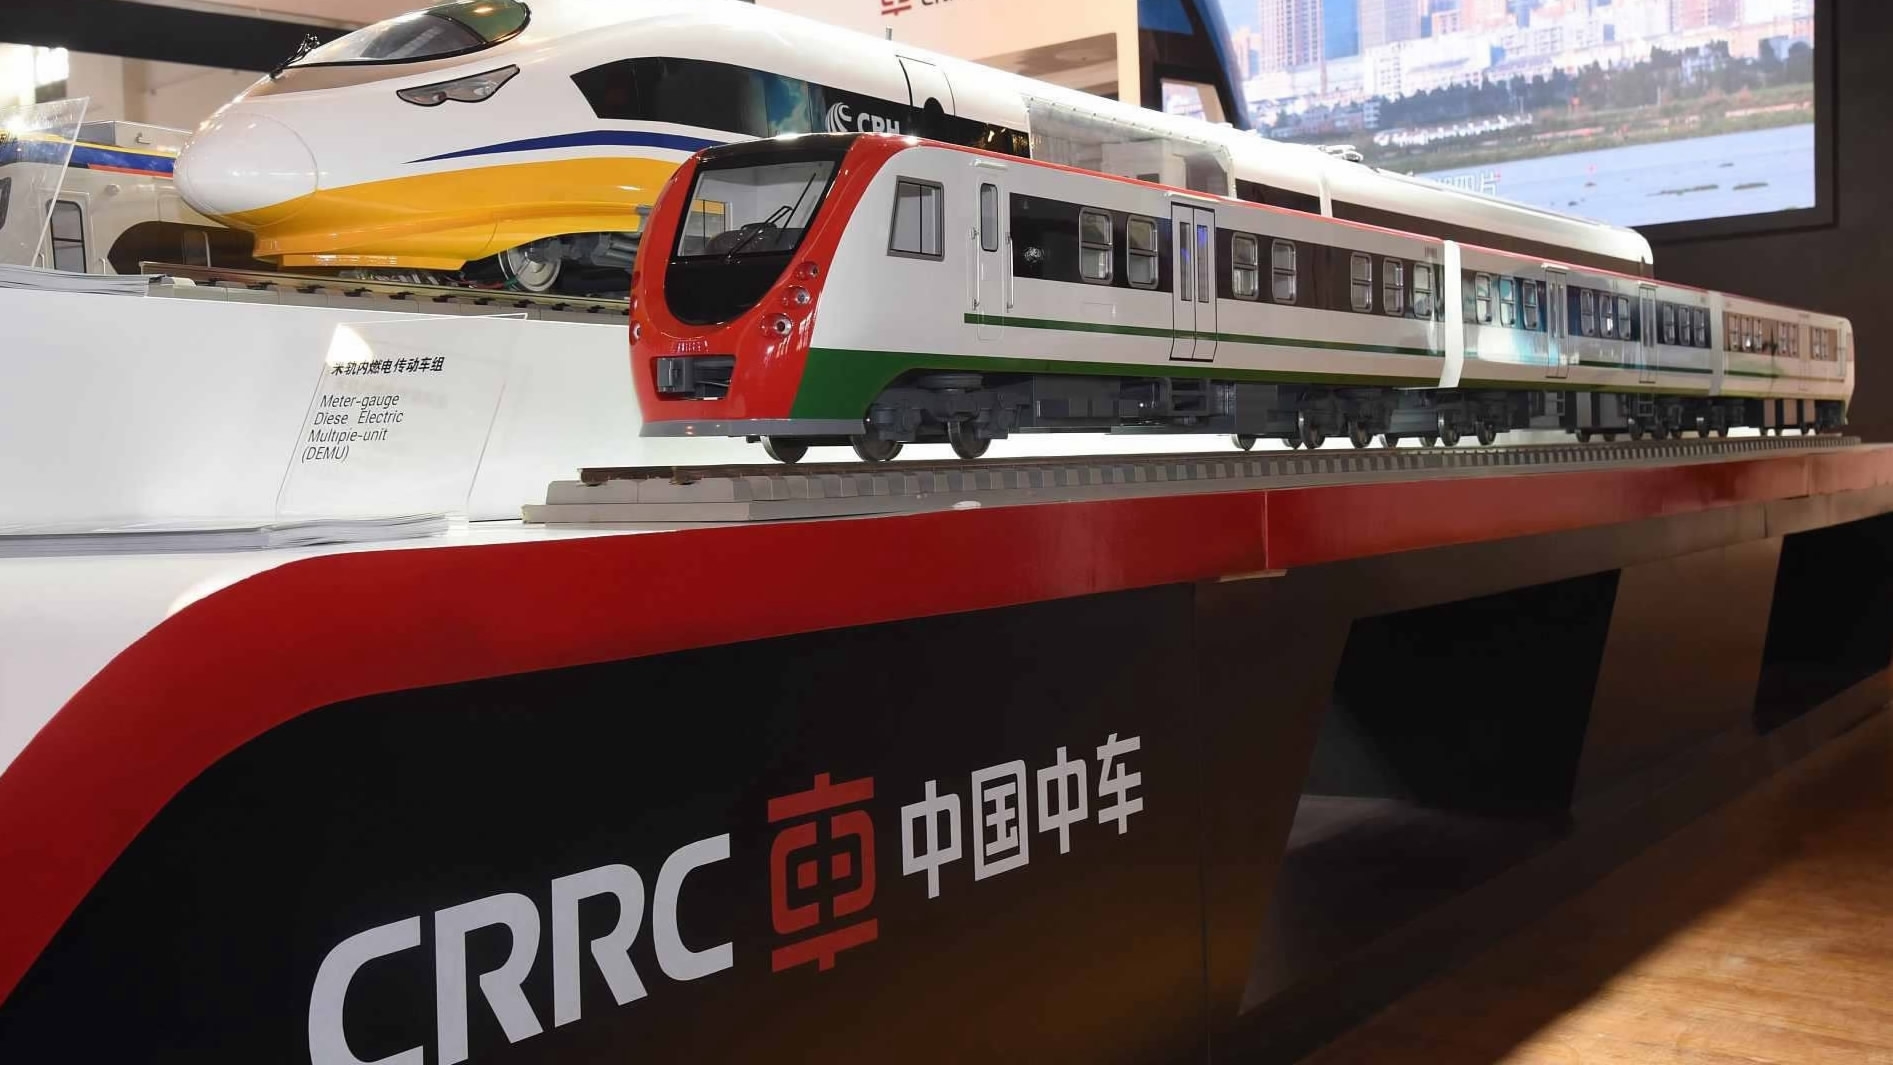 Scale models of CRRC rolling stock